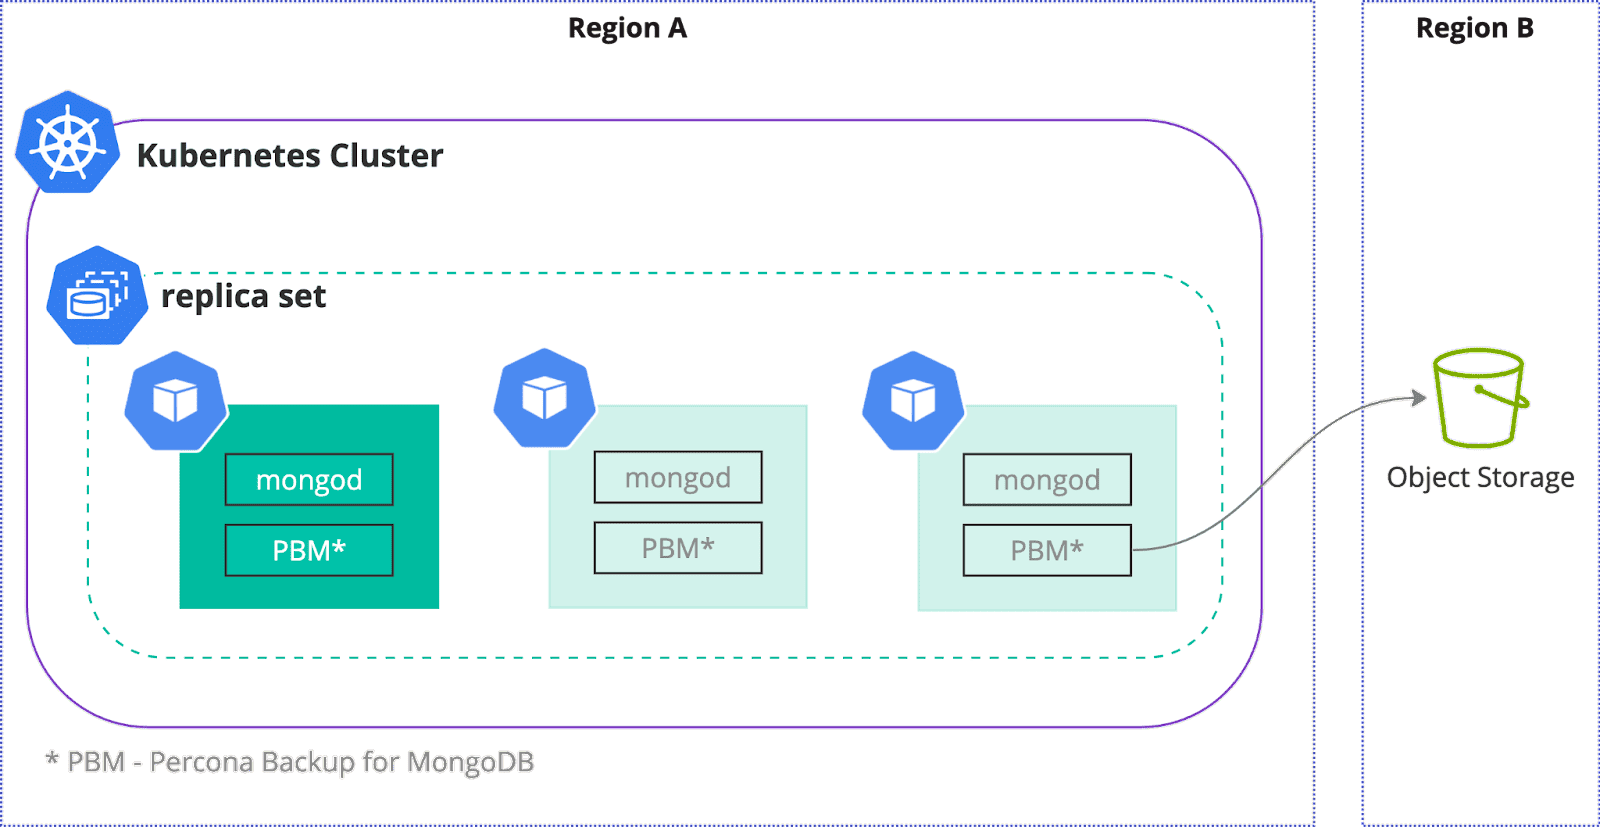 Diagram flow showing Kubernetes cluster backup safety from Region A to Region B